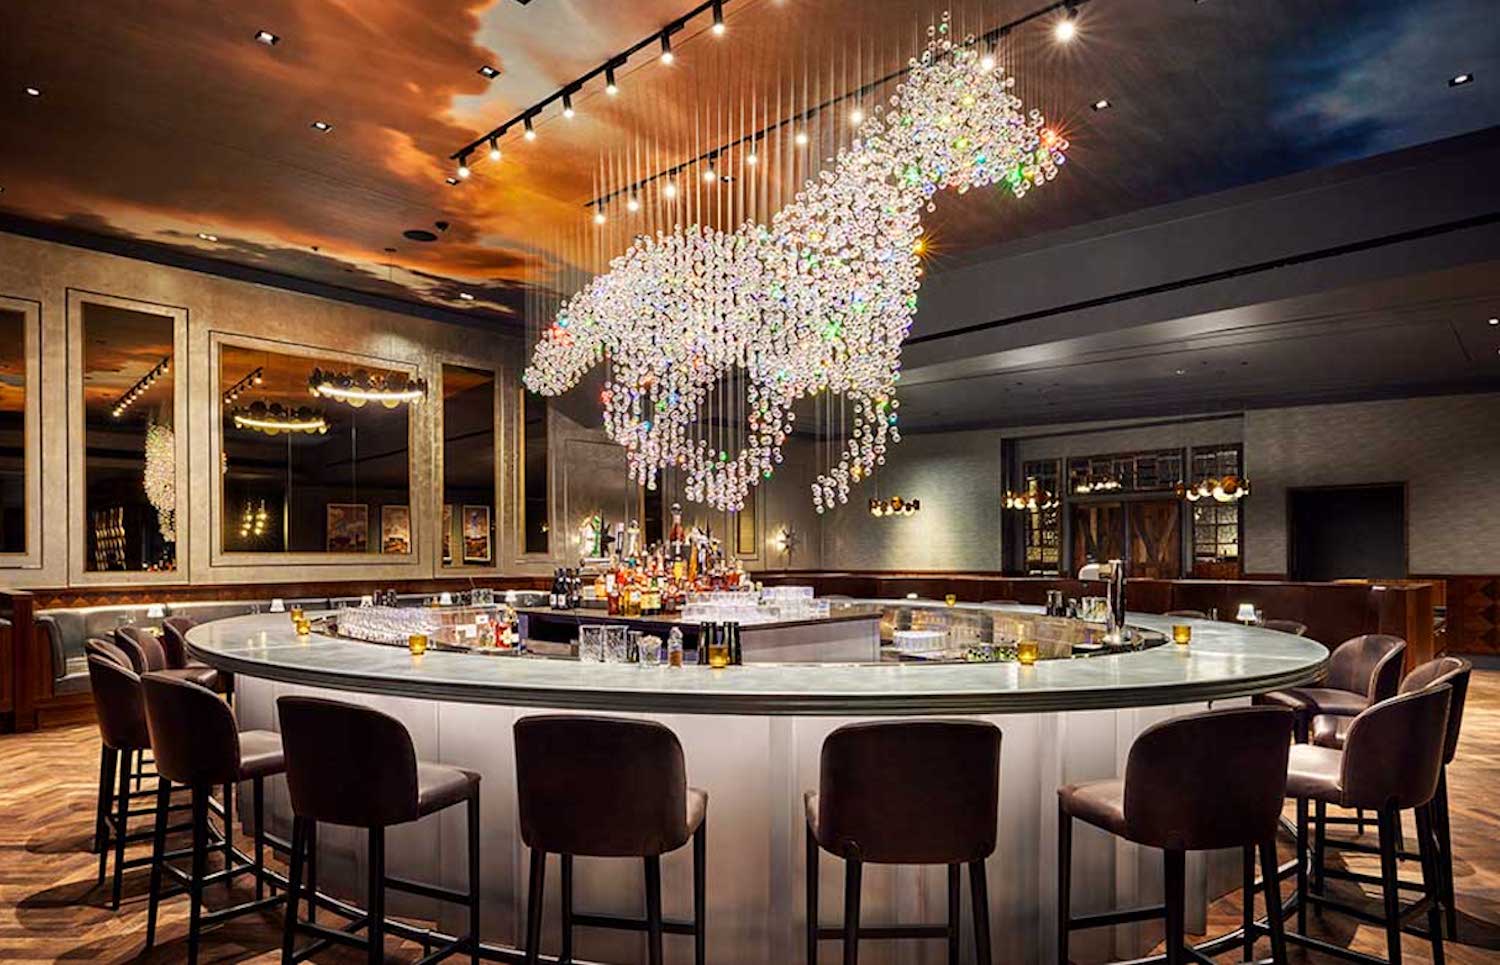 Horse-shapes crystal chandelier at the center of a round bar